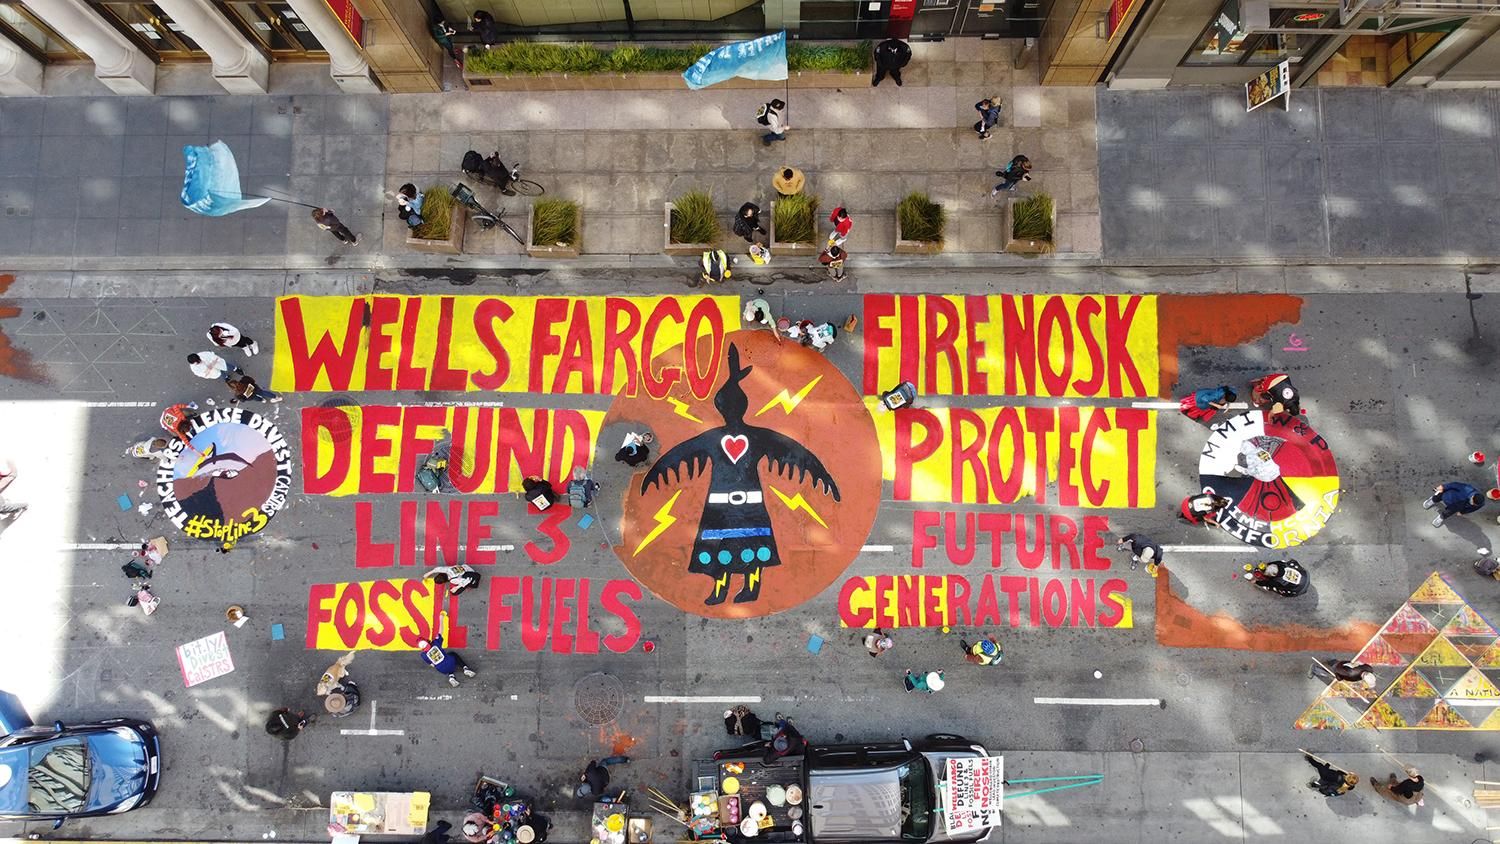 On Friday, hundreds of activists in San Francisco painted the street outside of Wells Fargo’s headquarters, urging the bank to both stop funding Line 3, and remove Noski from the head of the bank. (Photo: Arthur Koch)